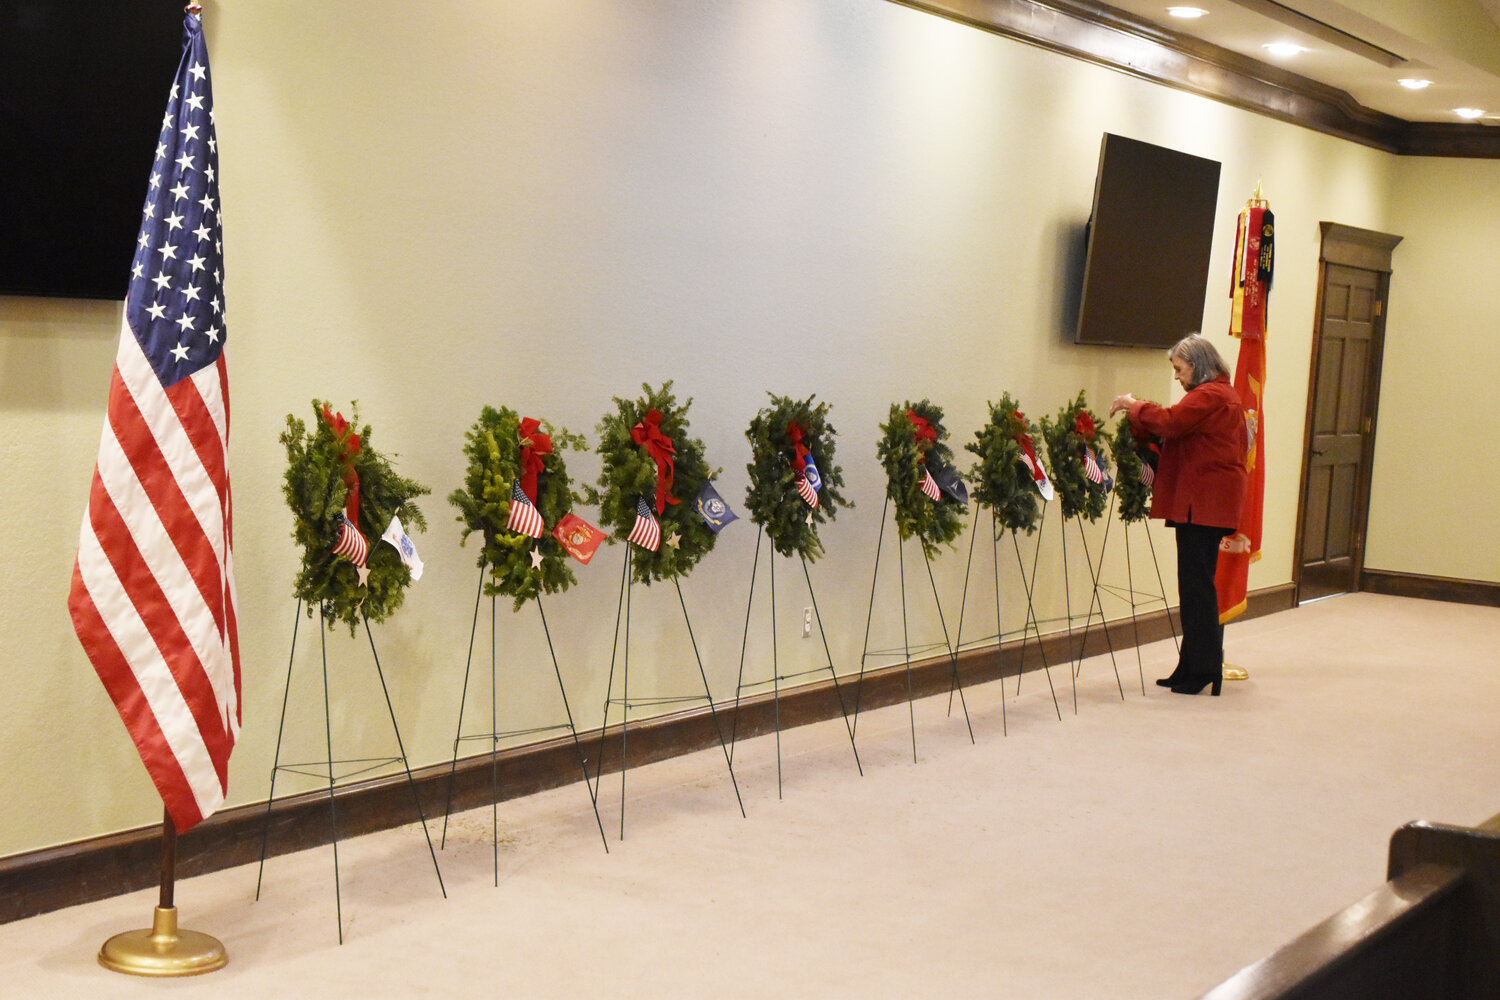 Barbara Vogl places a wreath in honor of POWs and MIAs.